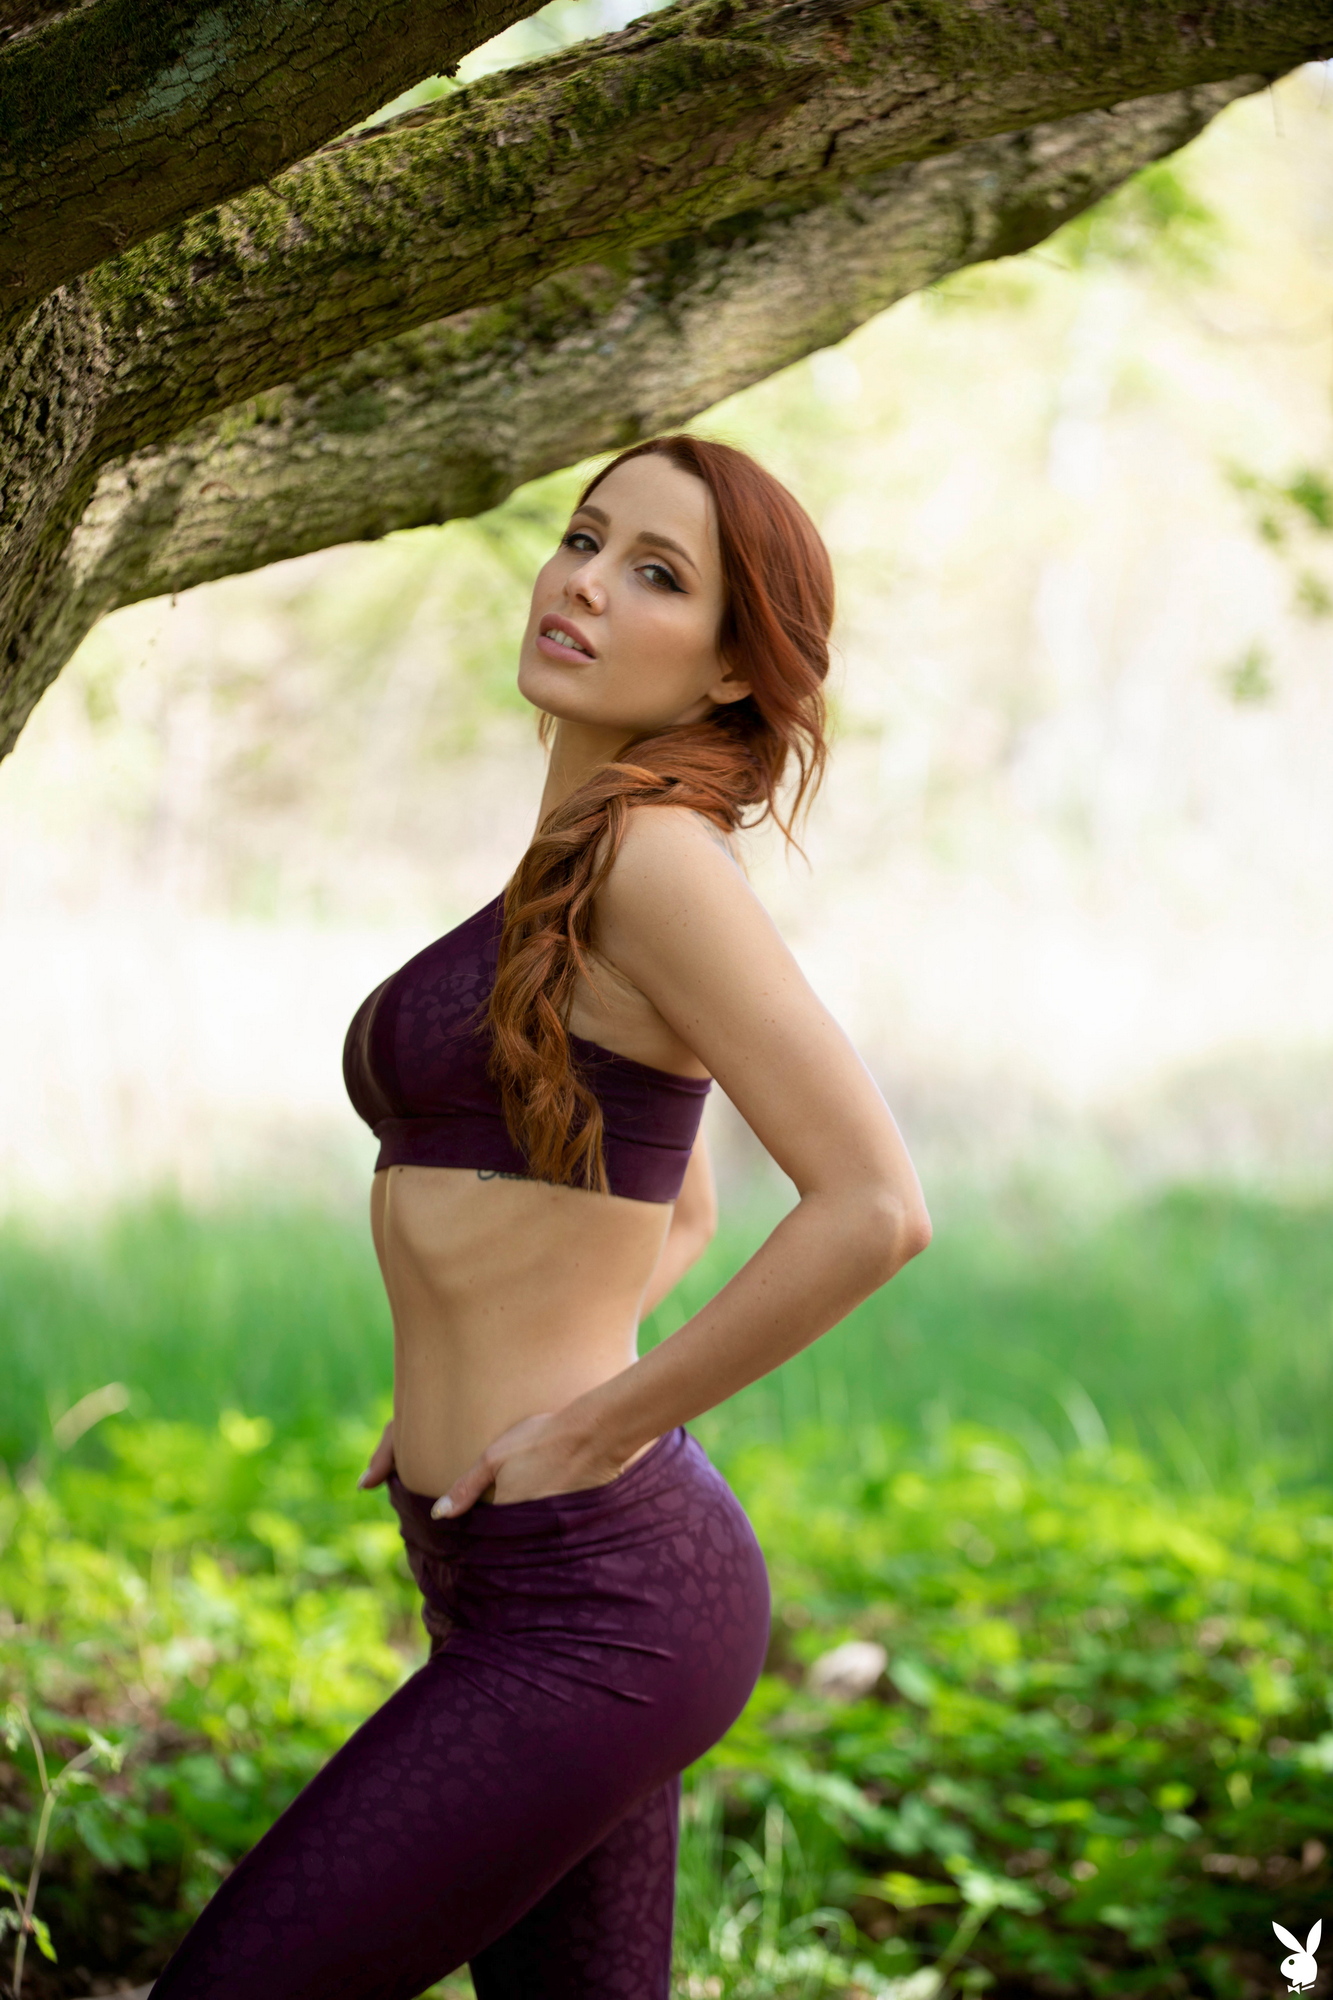 sadie-gray-running-over-boobs-naked-redhead-woods-playboy-10